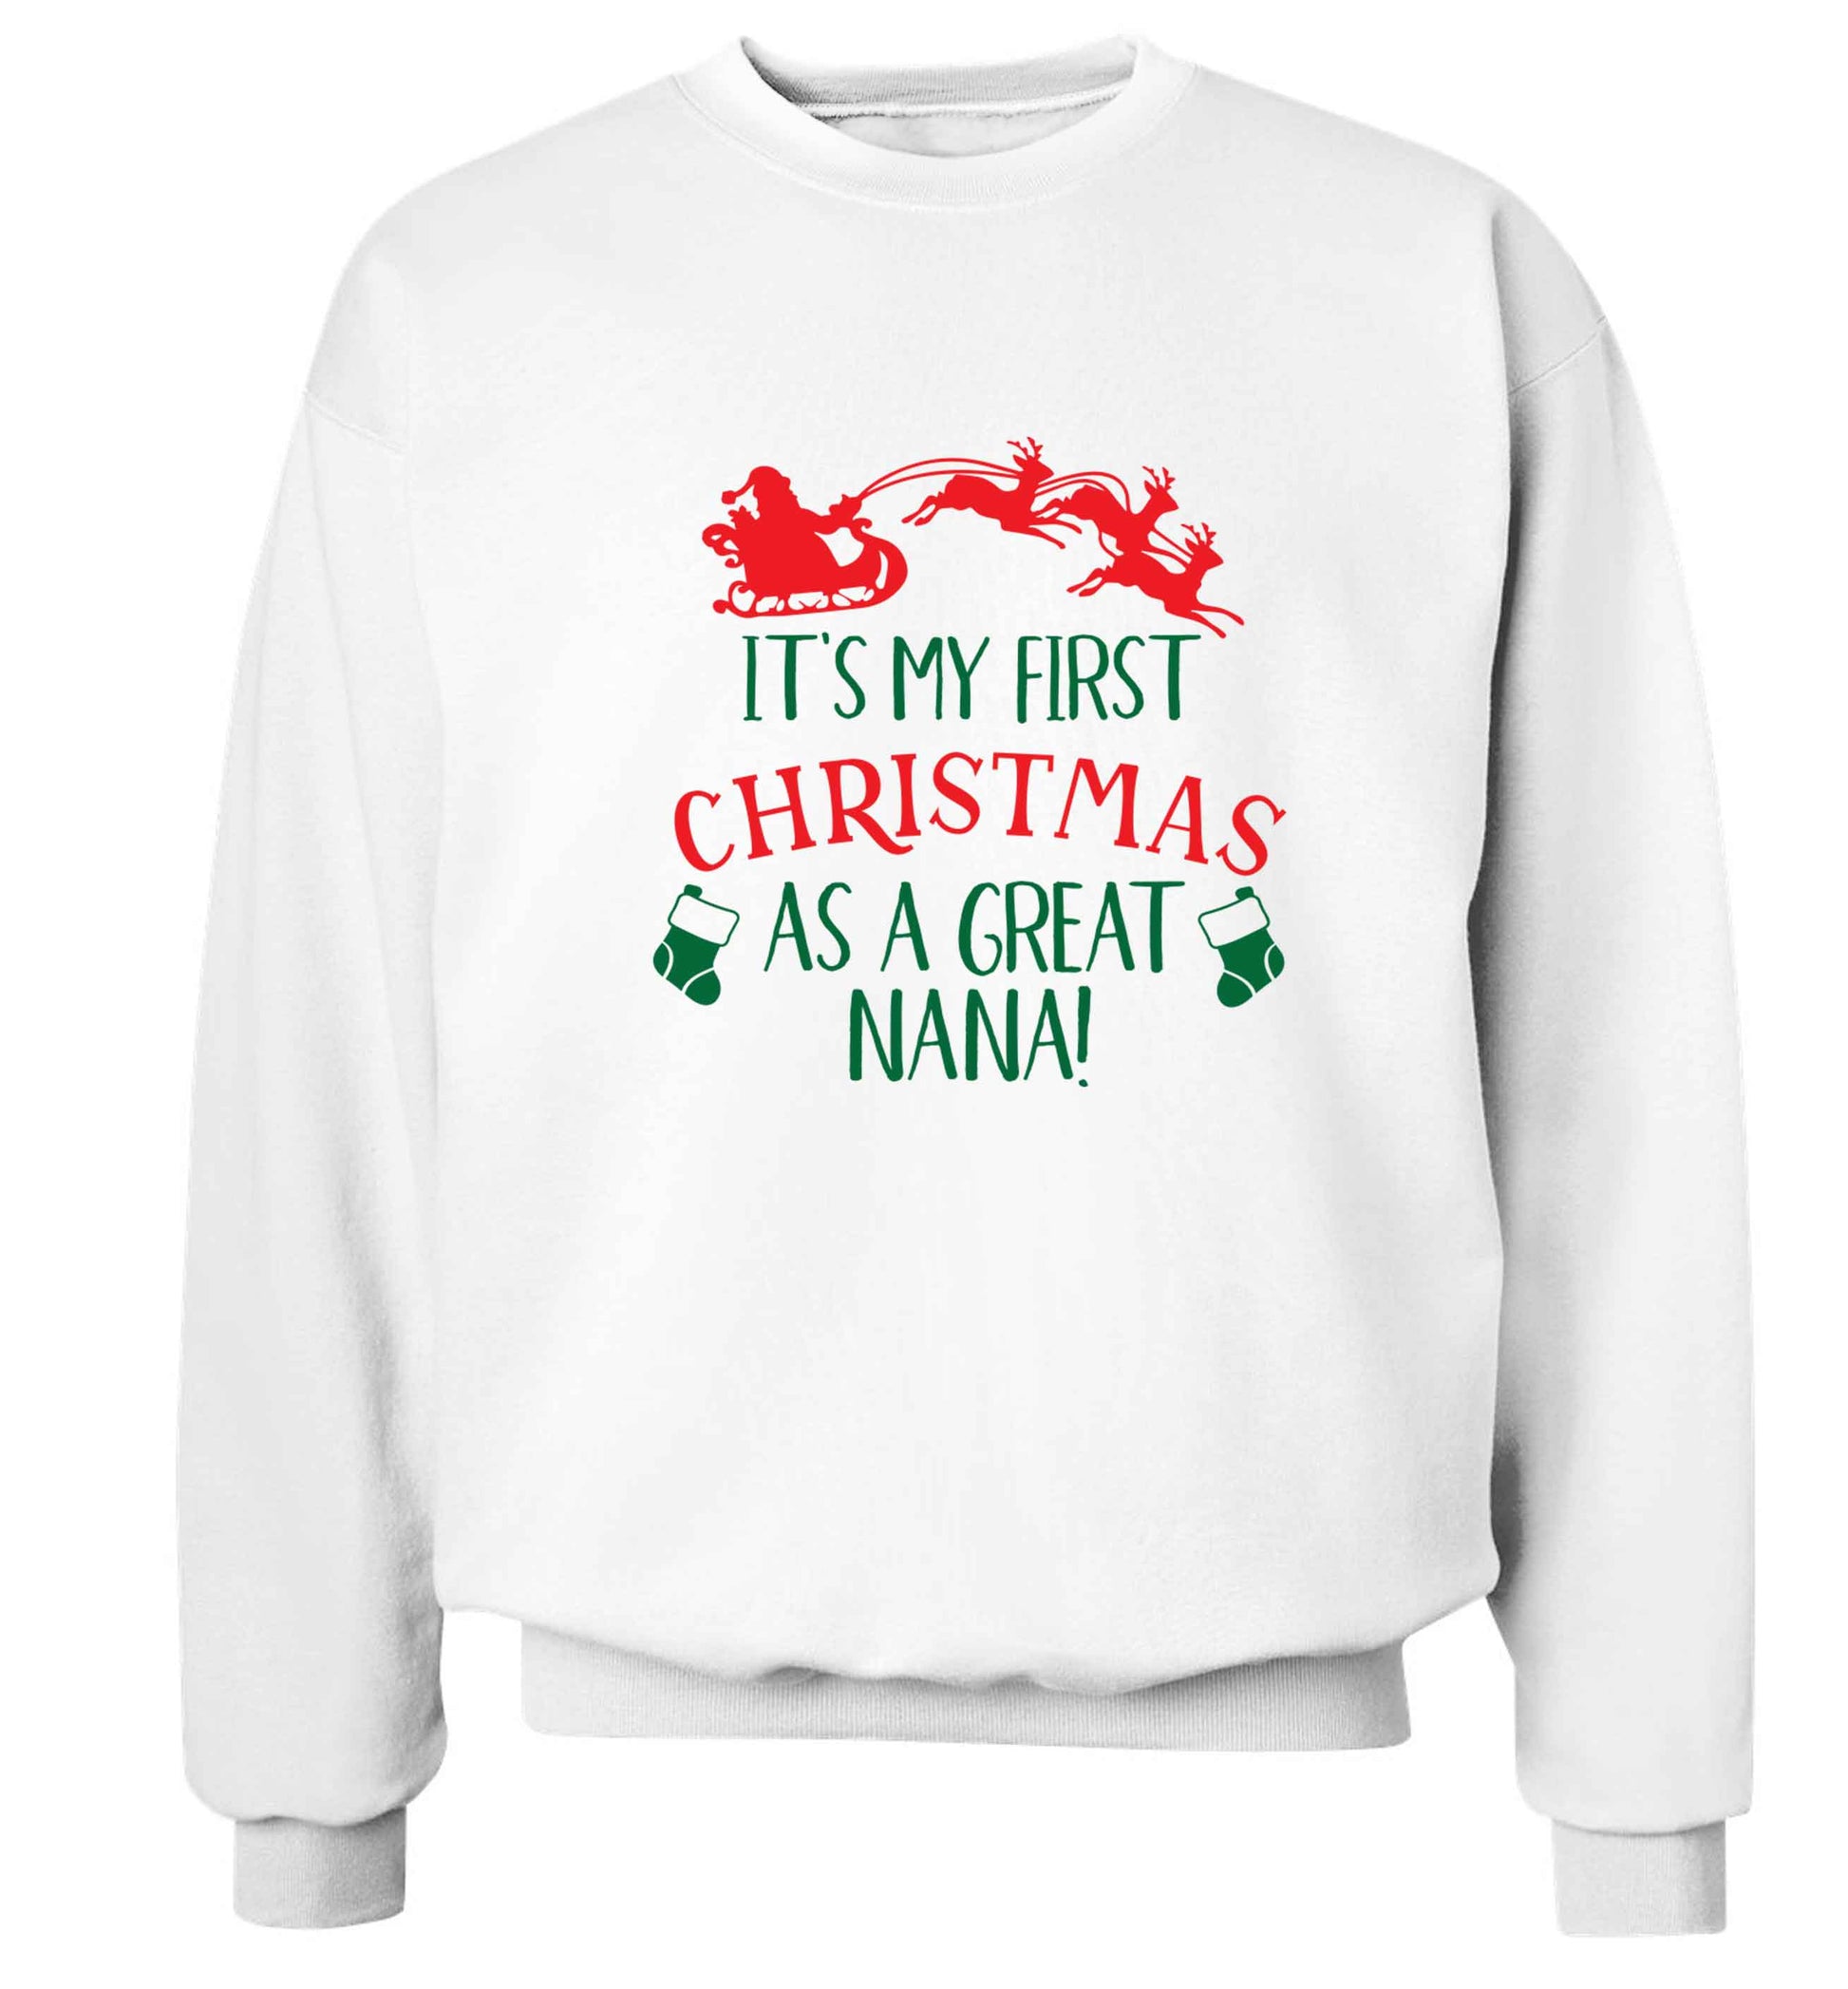 It's my first Christmas as a great nana! Adult's unisex white Sweater 2XL